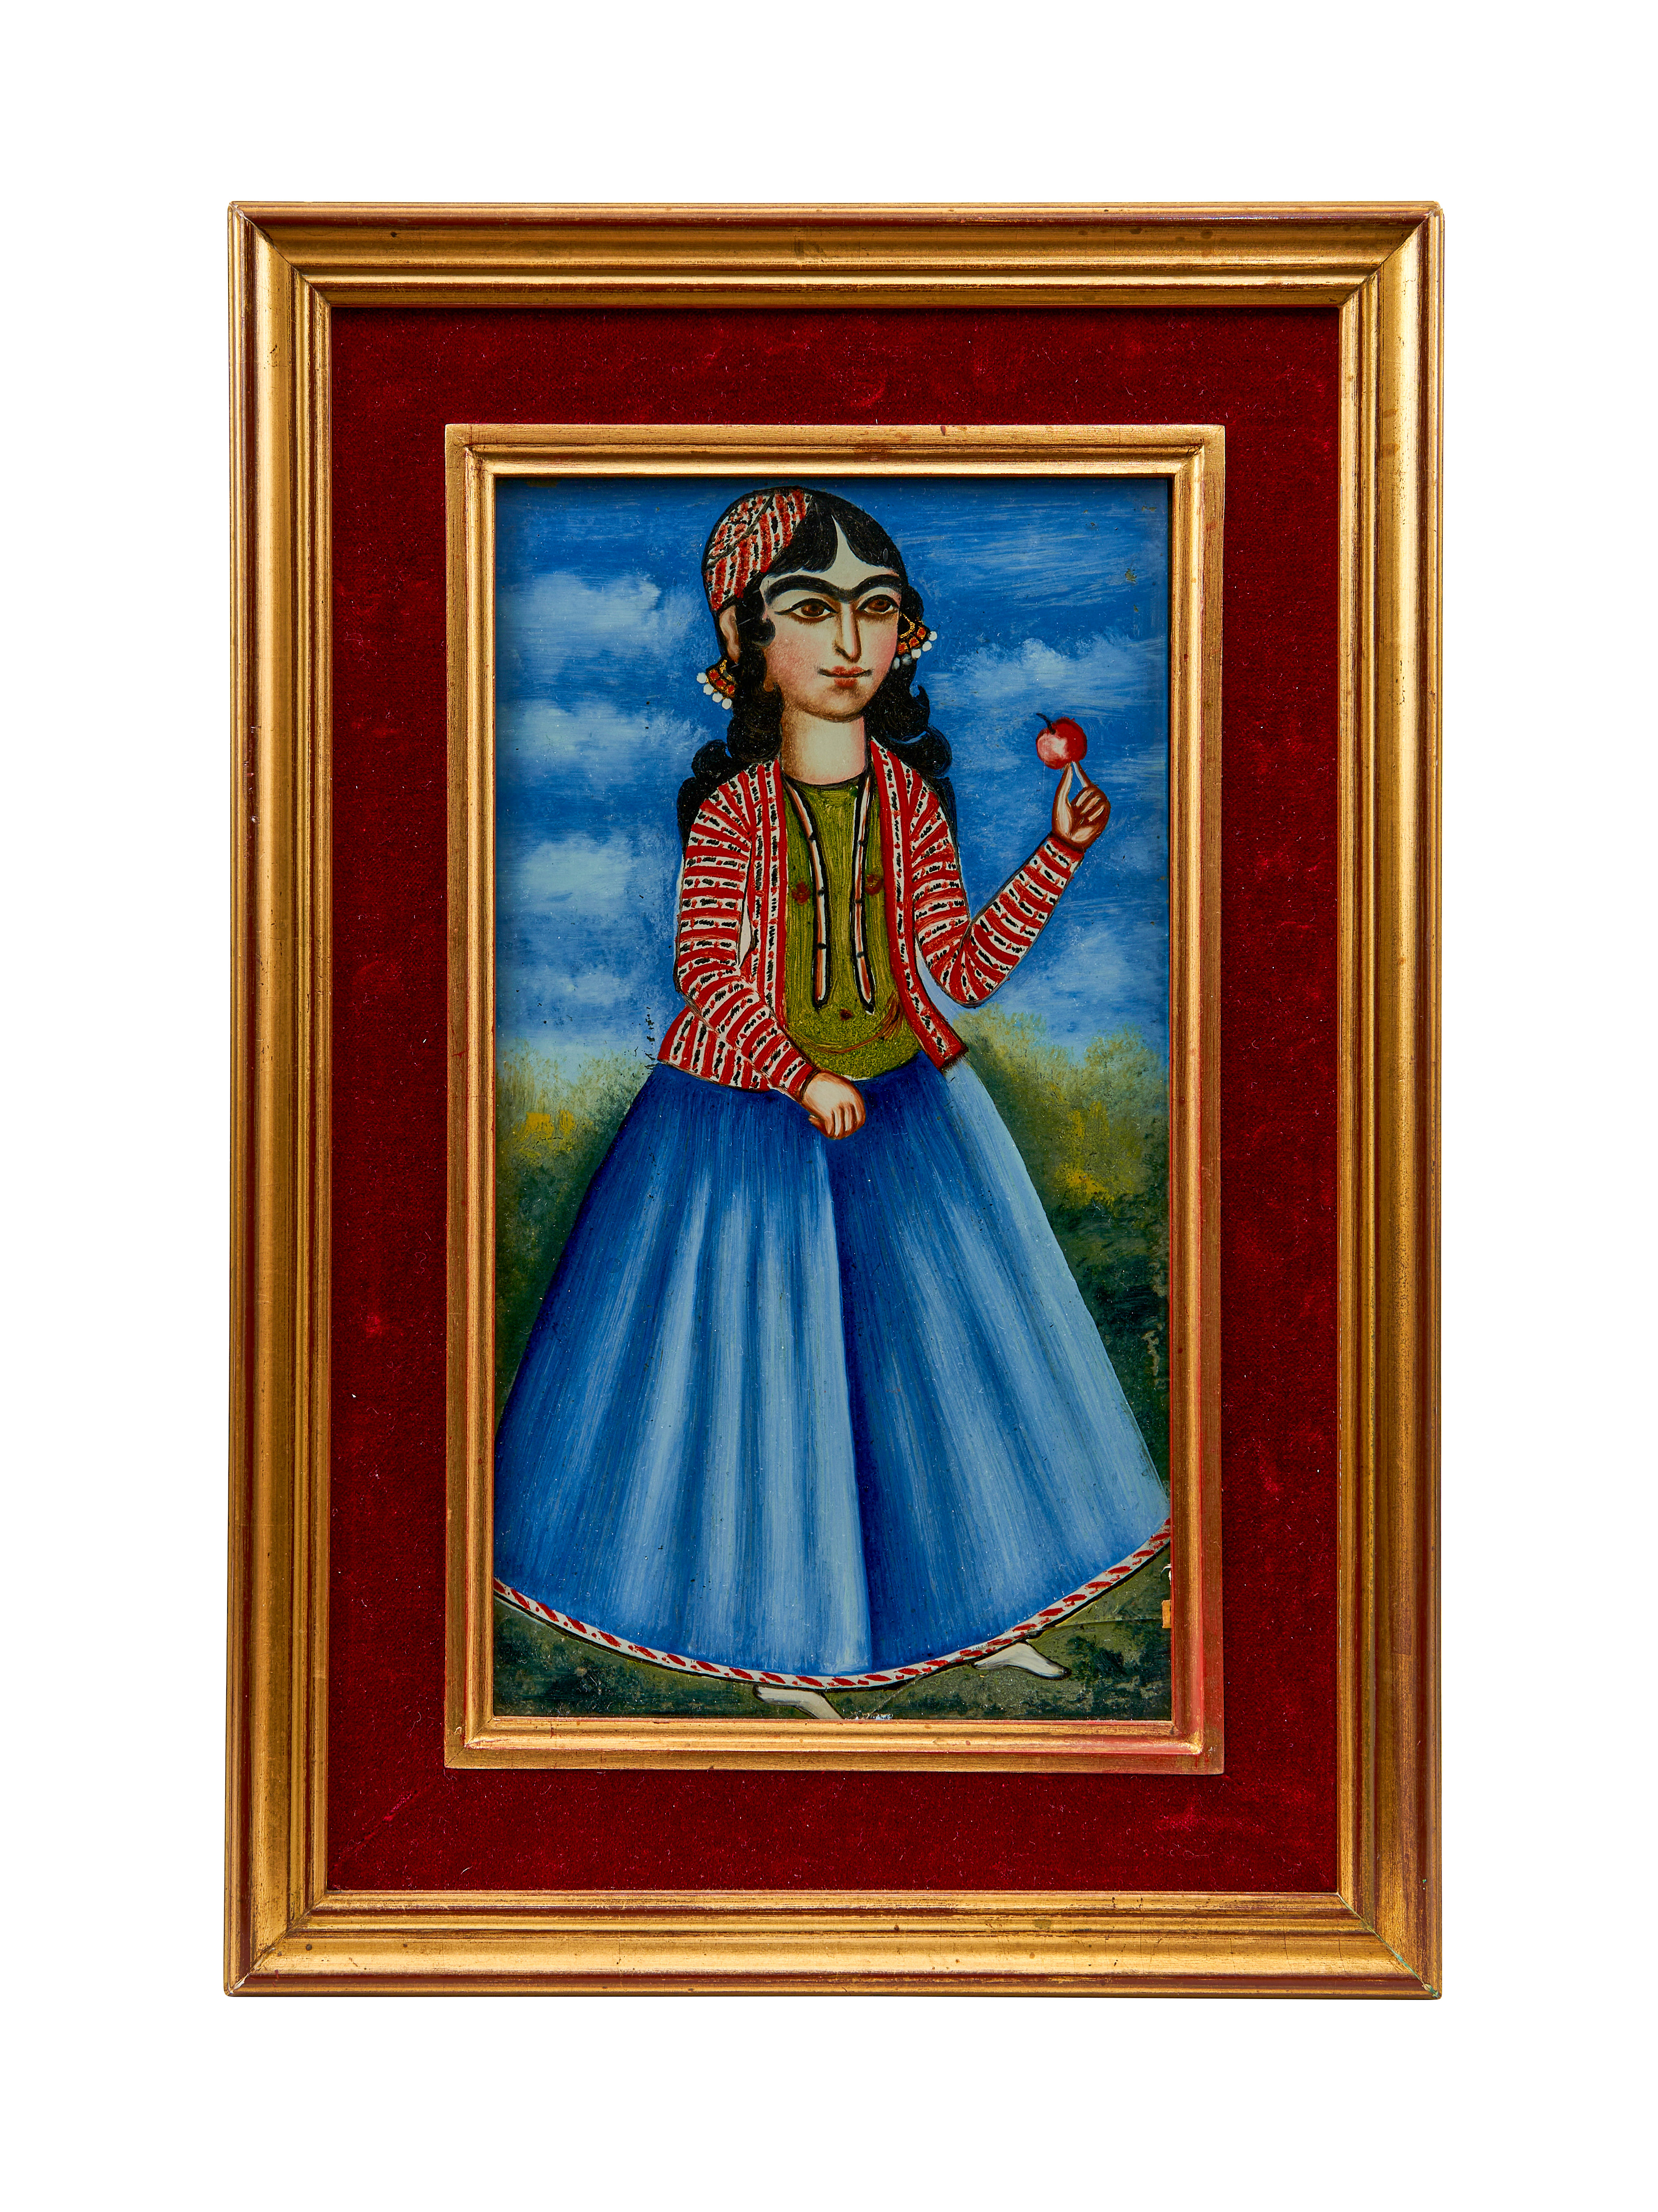 A QAJAR REVERSE GLASS PAINTING OF A LADY, PERSIA, 19TH CENTURY